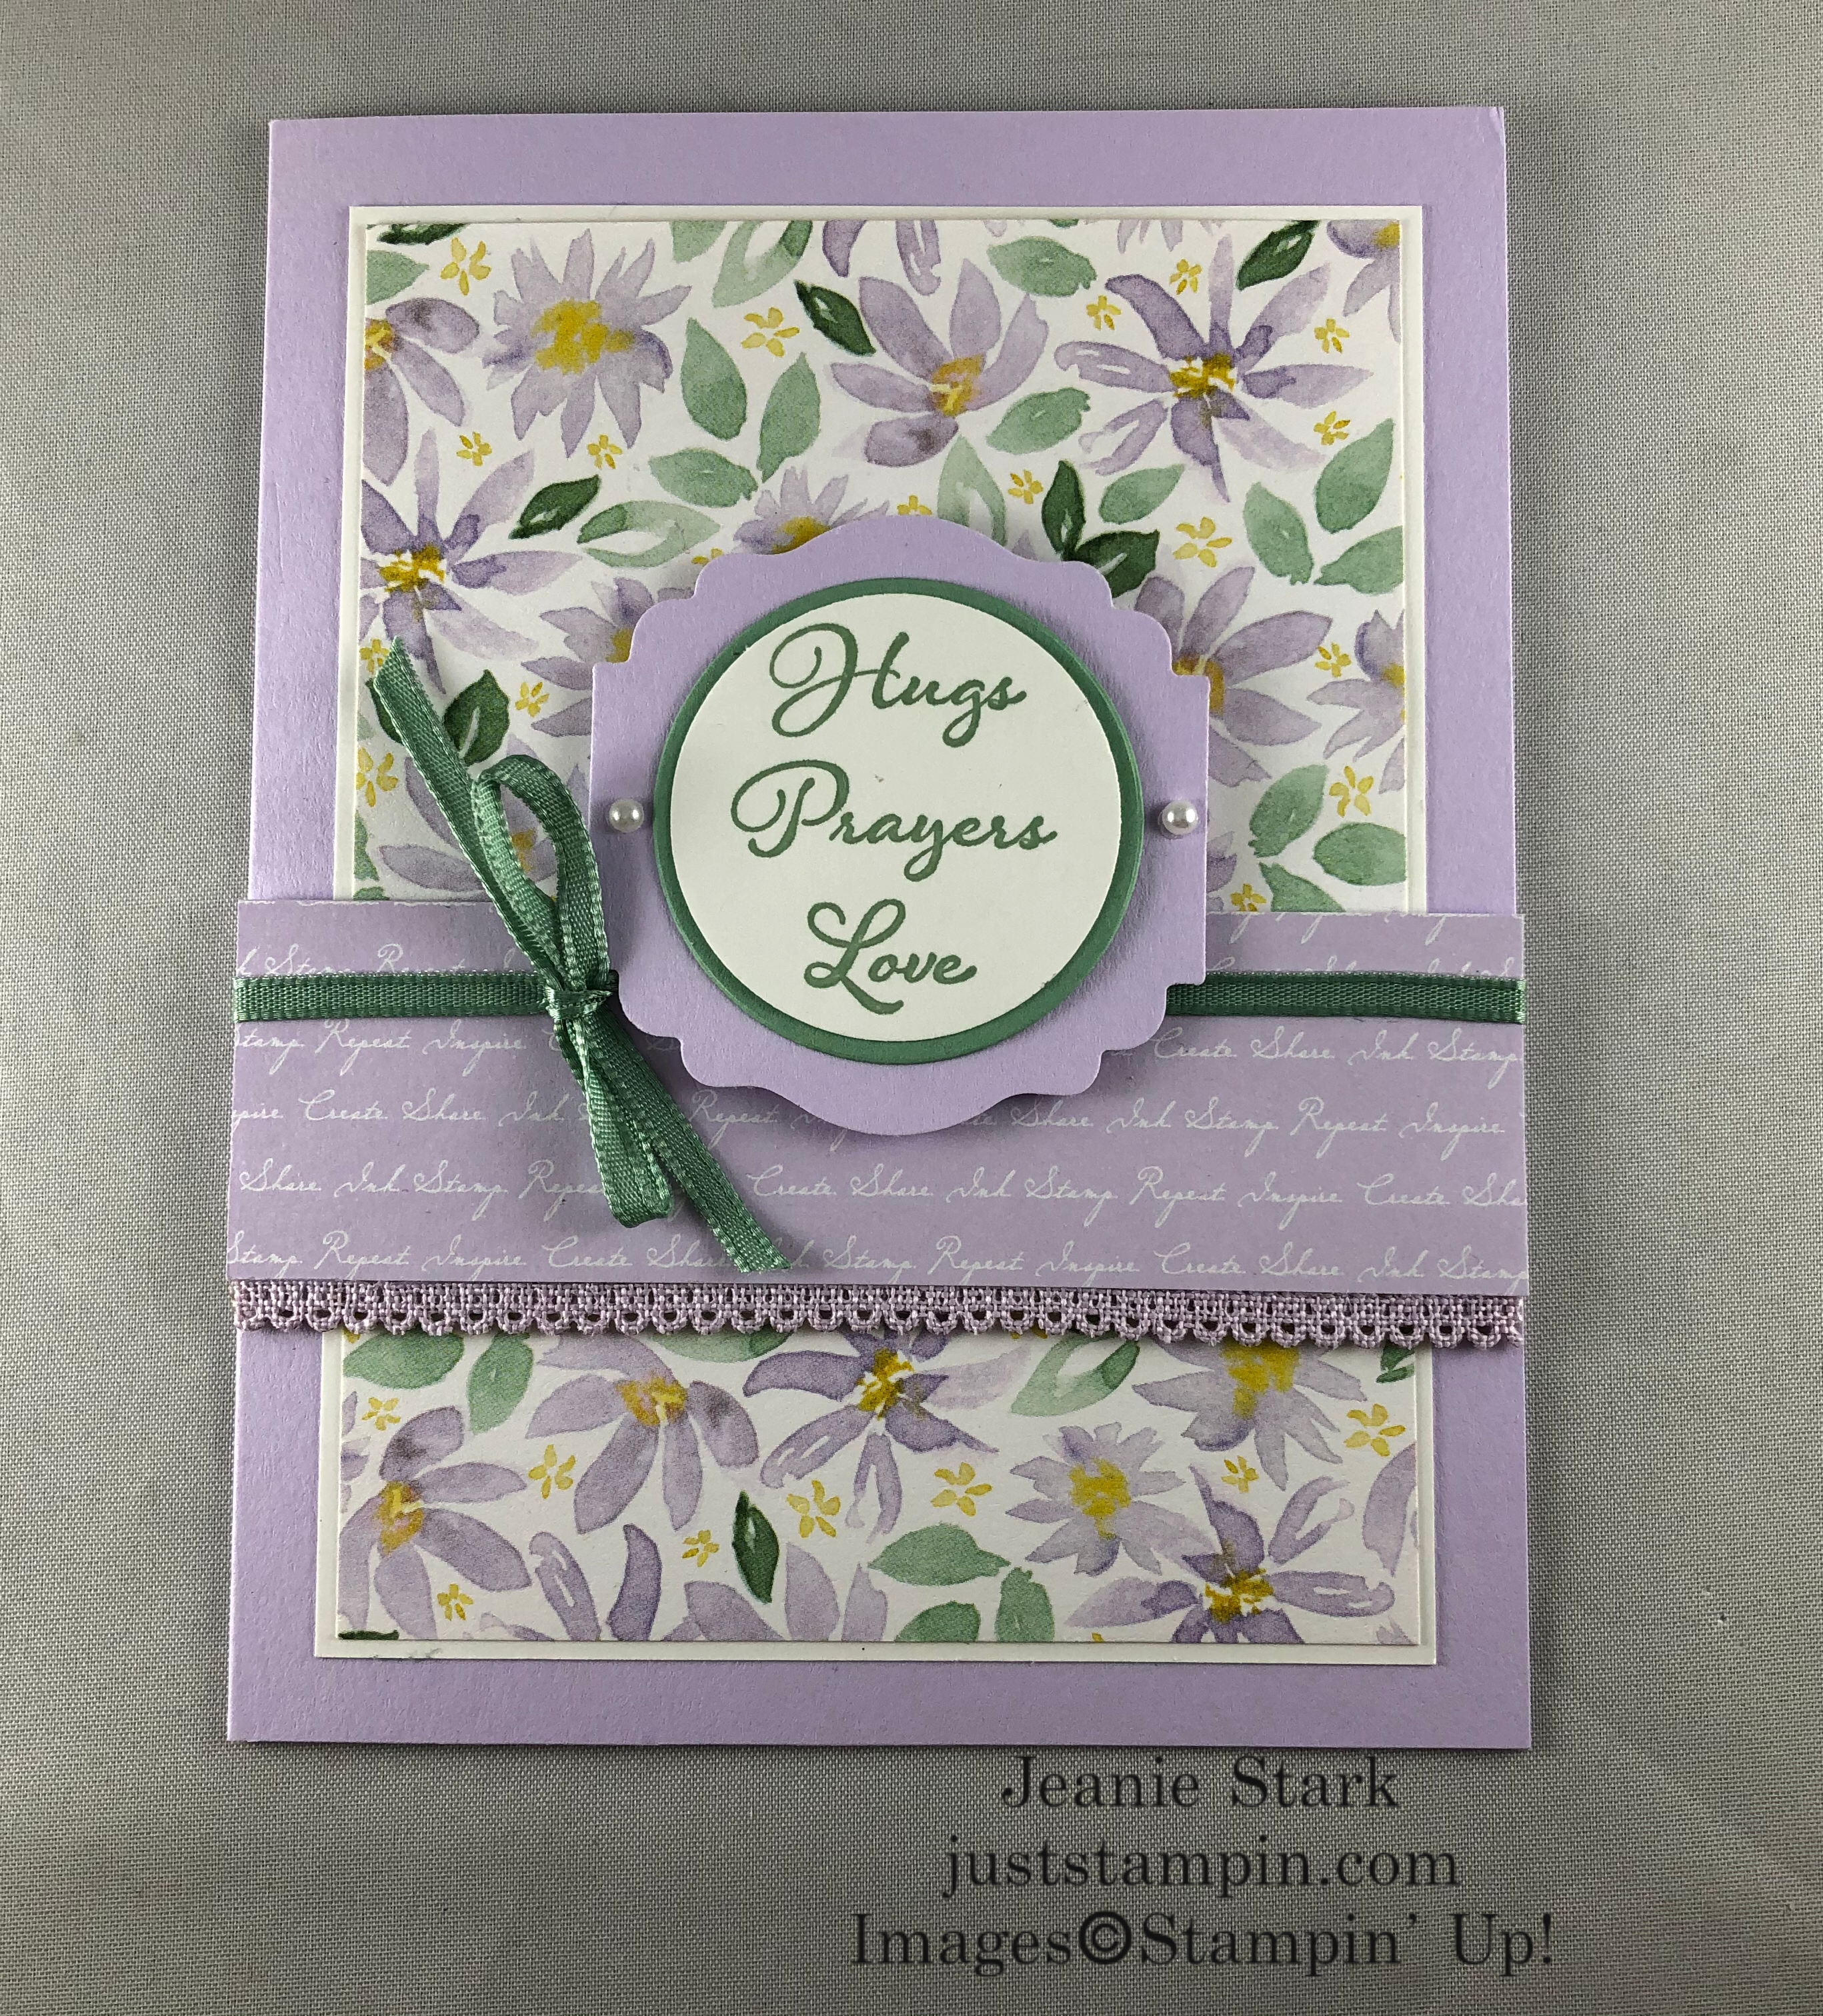 Stampin Up Best Dressed Positive Thoughts card idea for friends and family - Jeanie Stark StampinUp